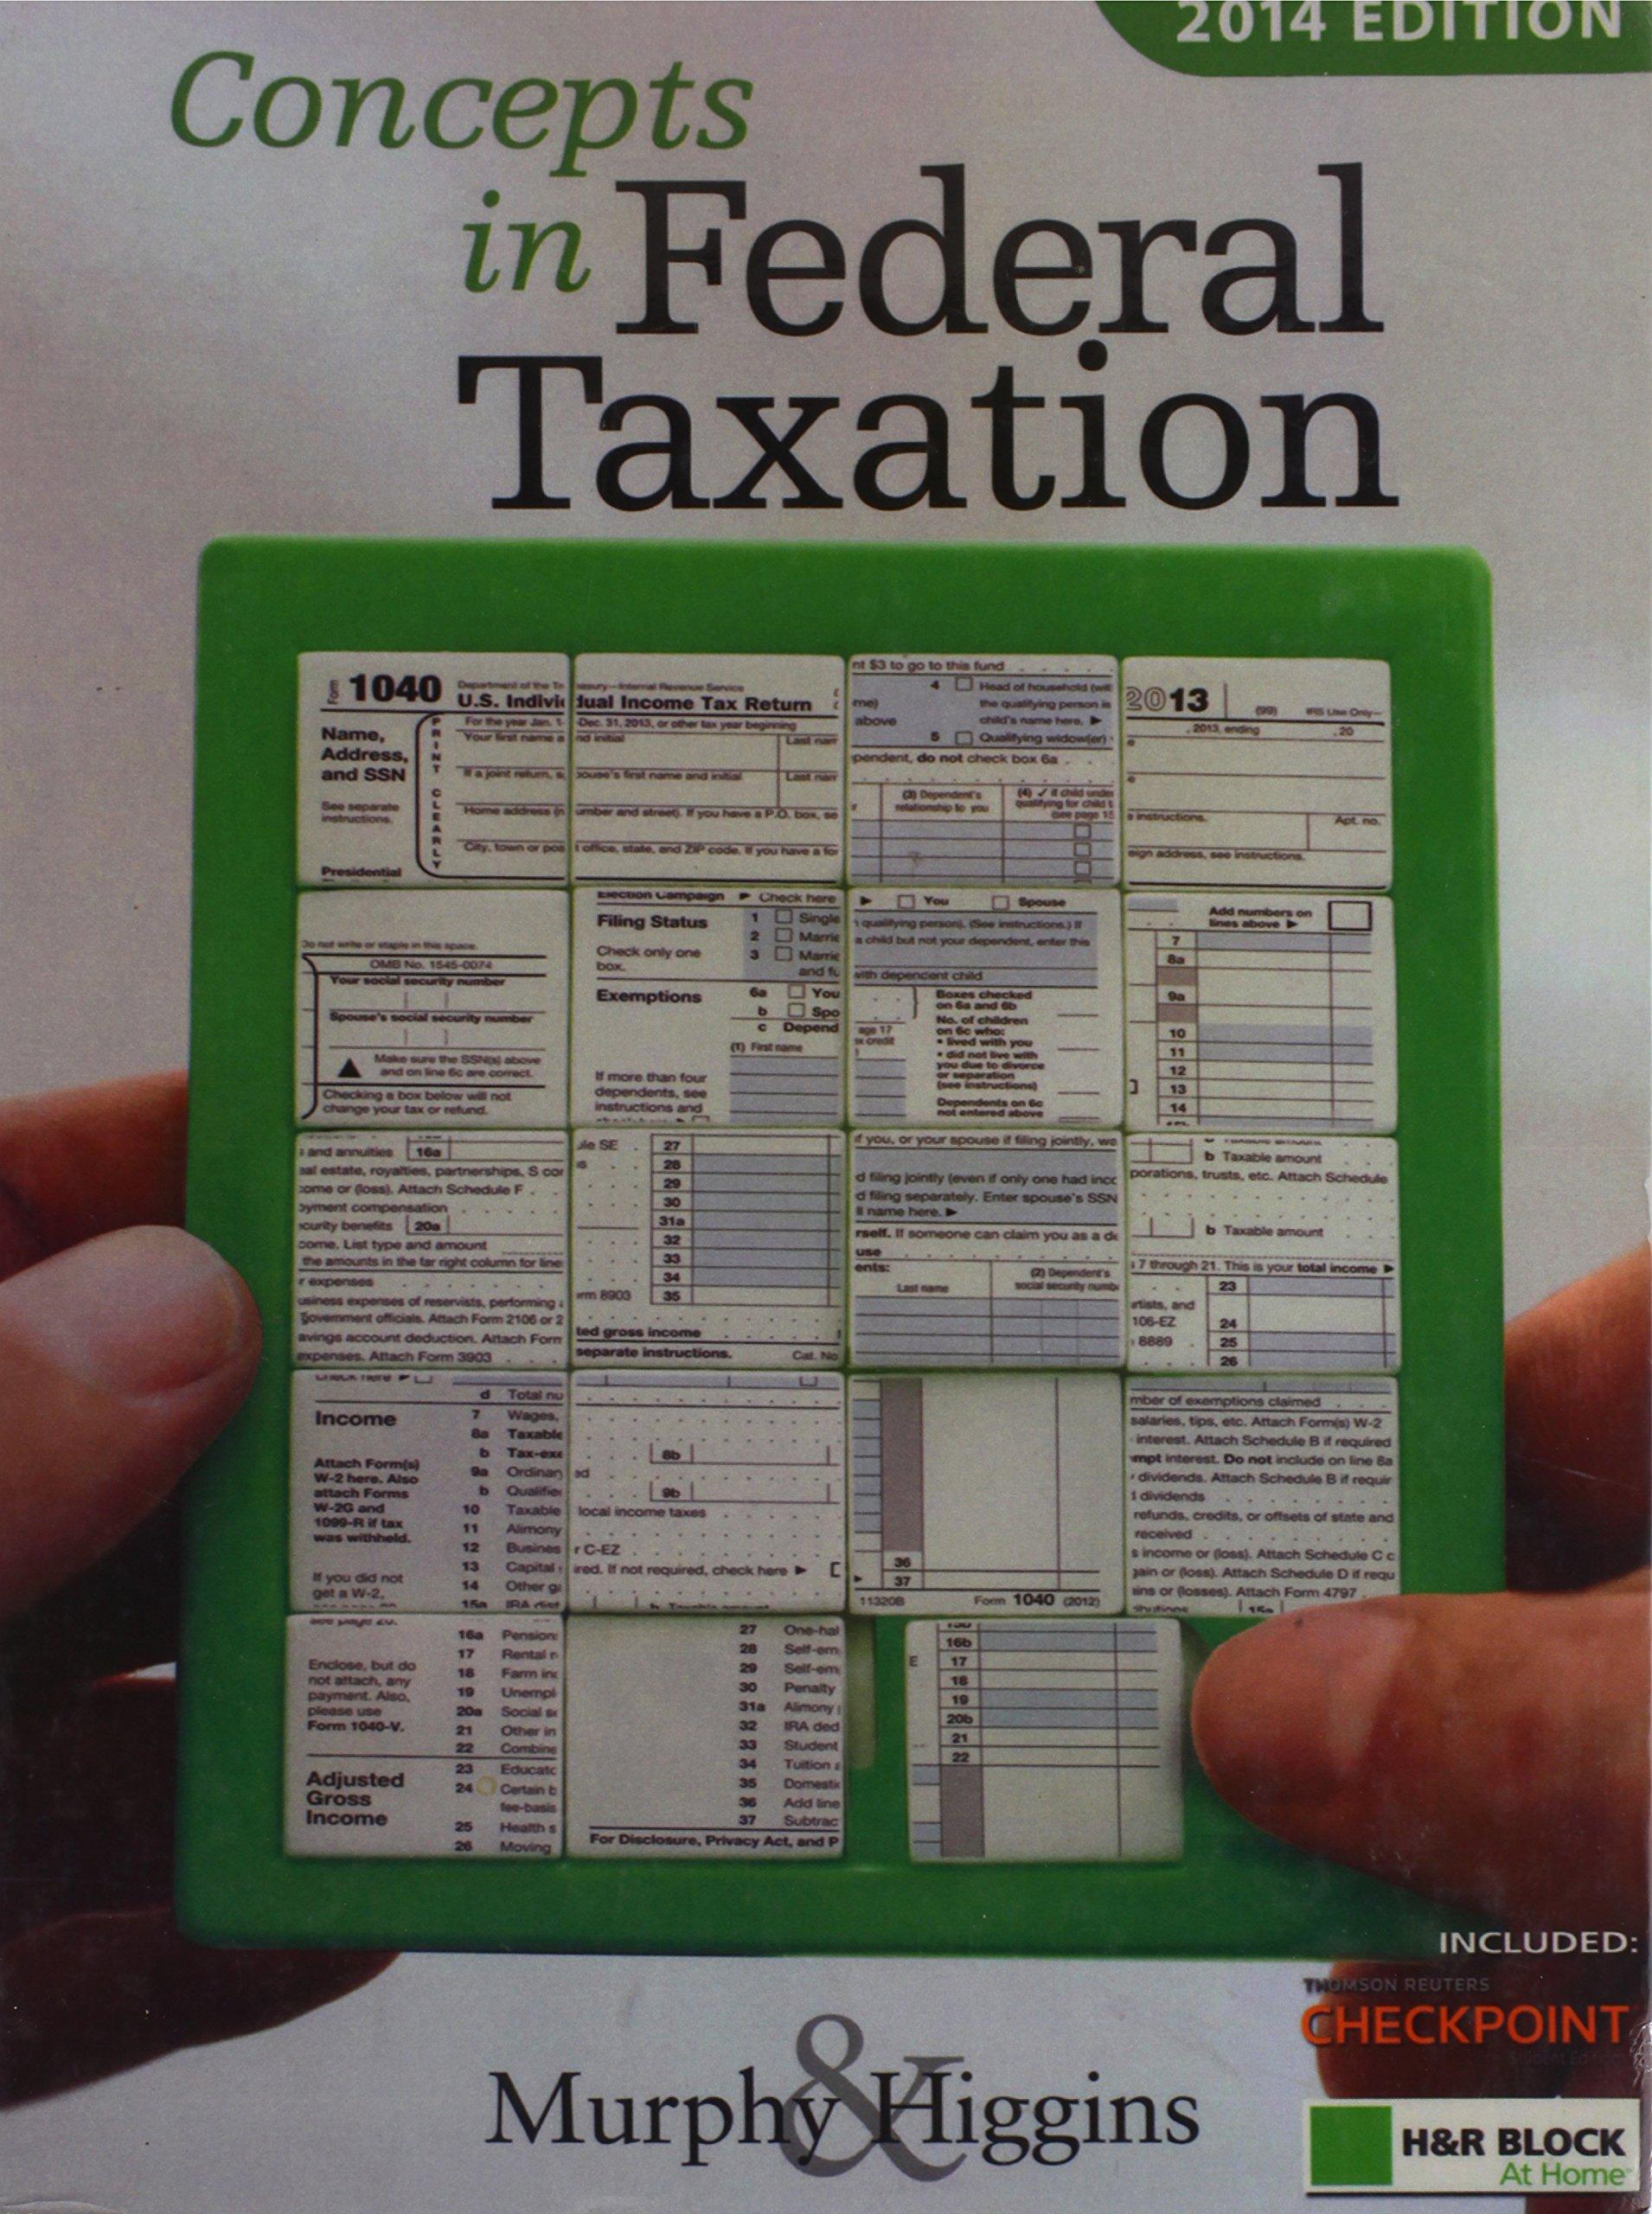 concepts in federal taxation 2014 21st edition kevin e. murphy, mark higgins 1285180569, 9781285180564